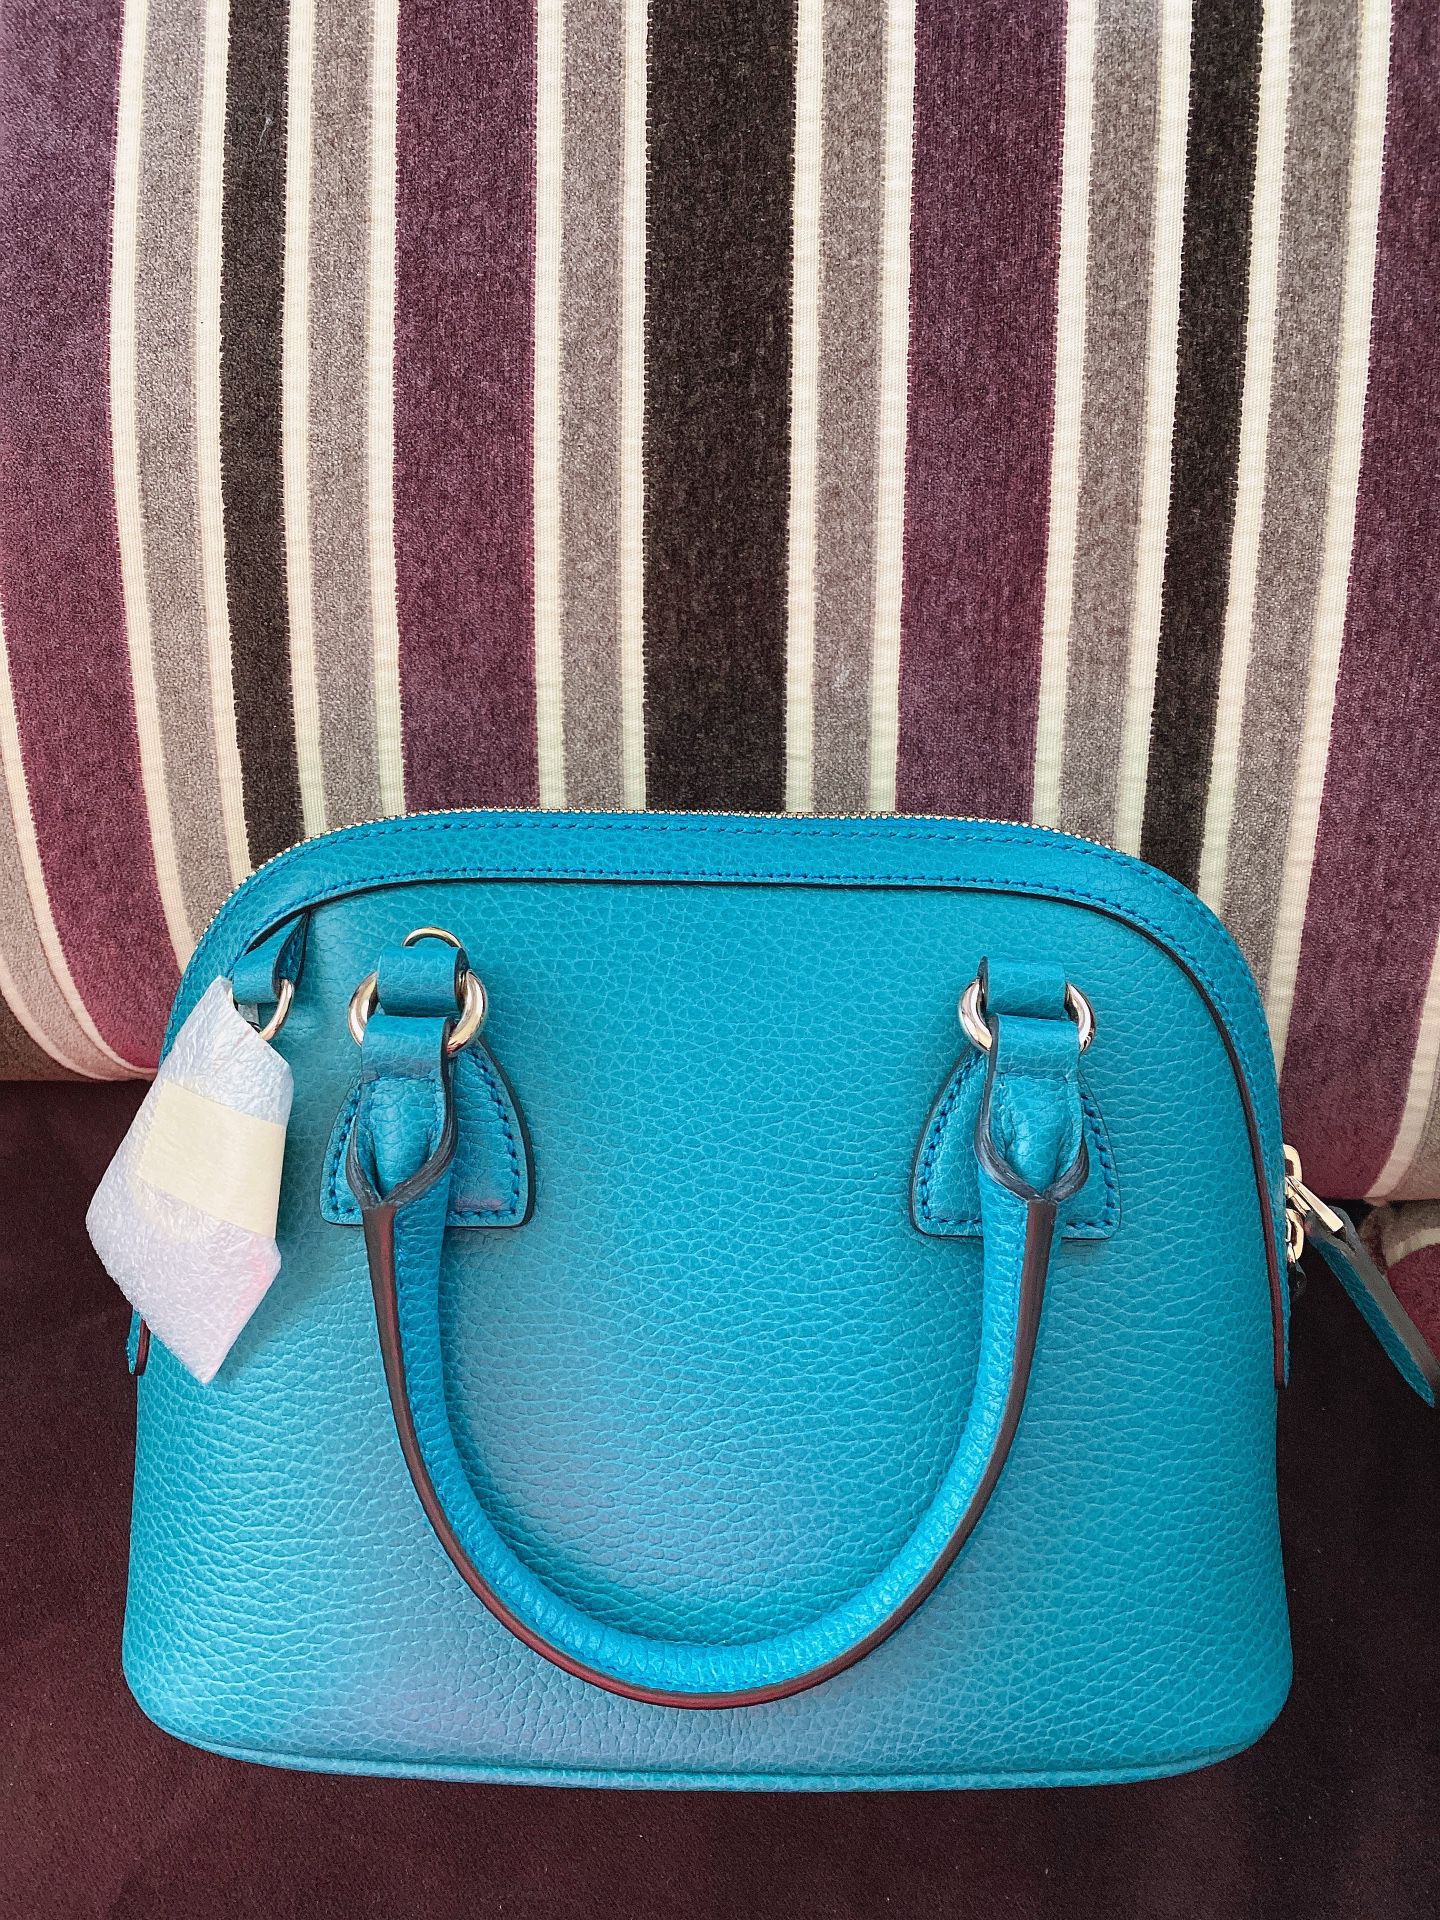 Gucci domed bag color teal brand new